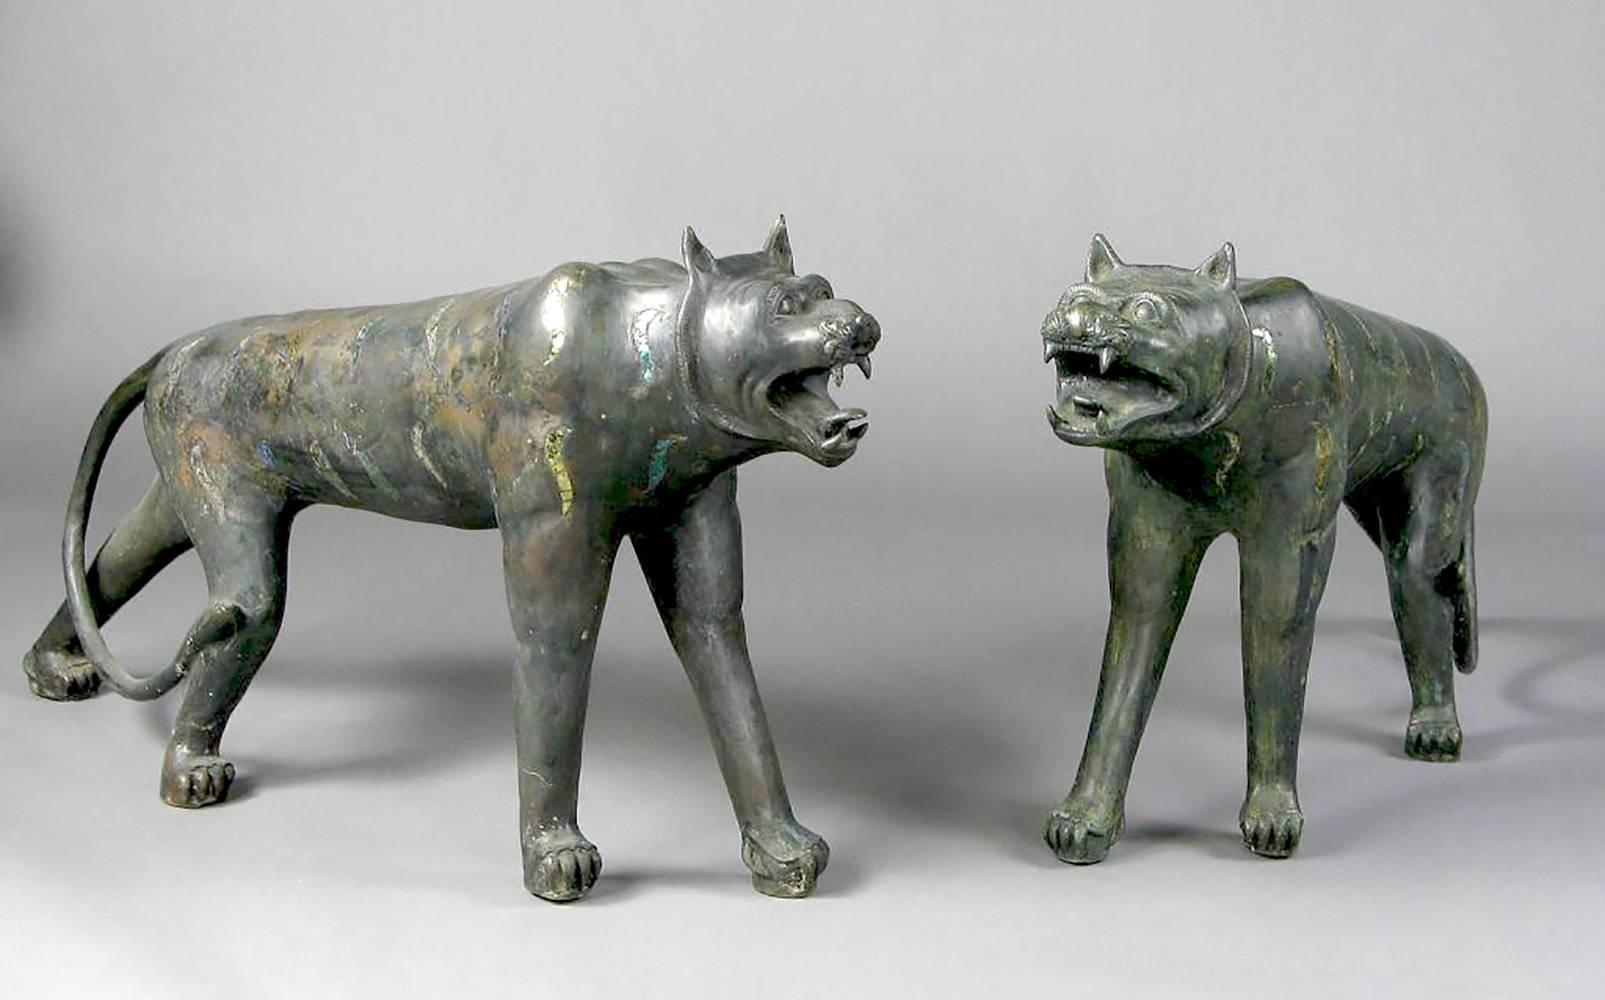 Both striking and rare, these two bronze jungle cats are likely mythological creatures, most closely resembling tigers or leopards. A matched pair, one is slightly larger than the other and their patinated bronze surface is adorned with polychrome